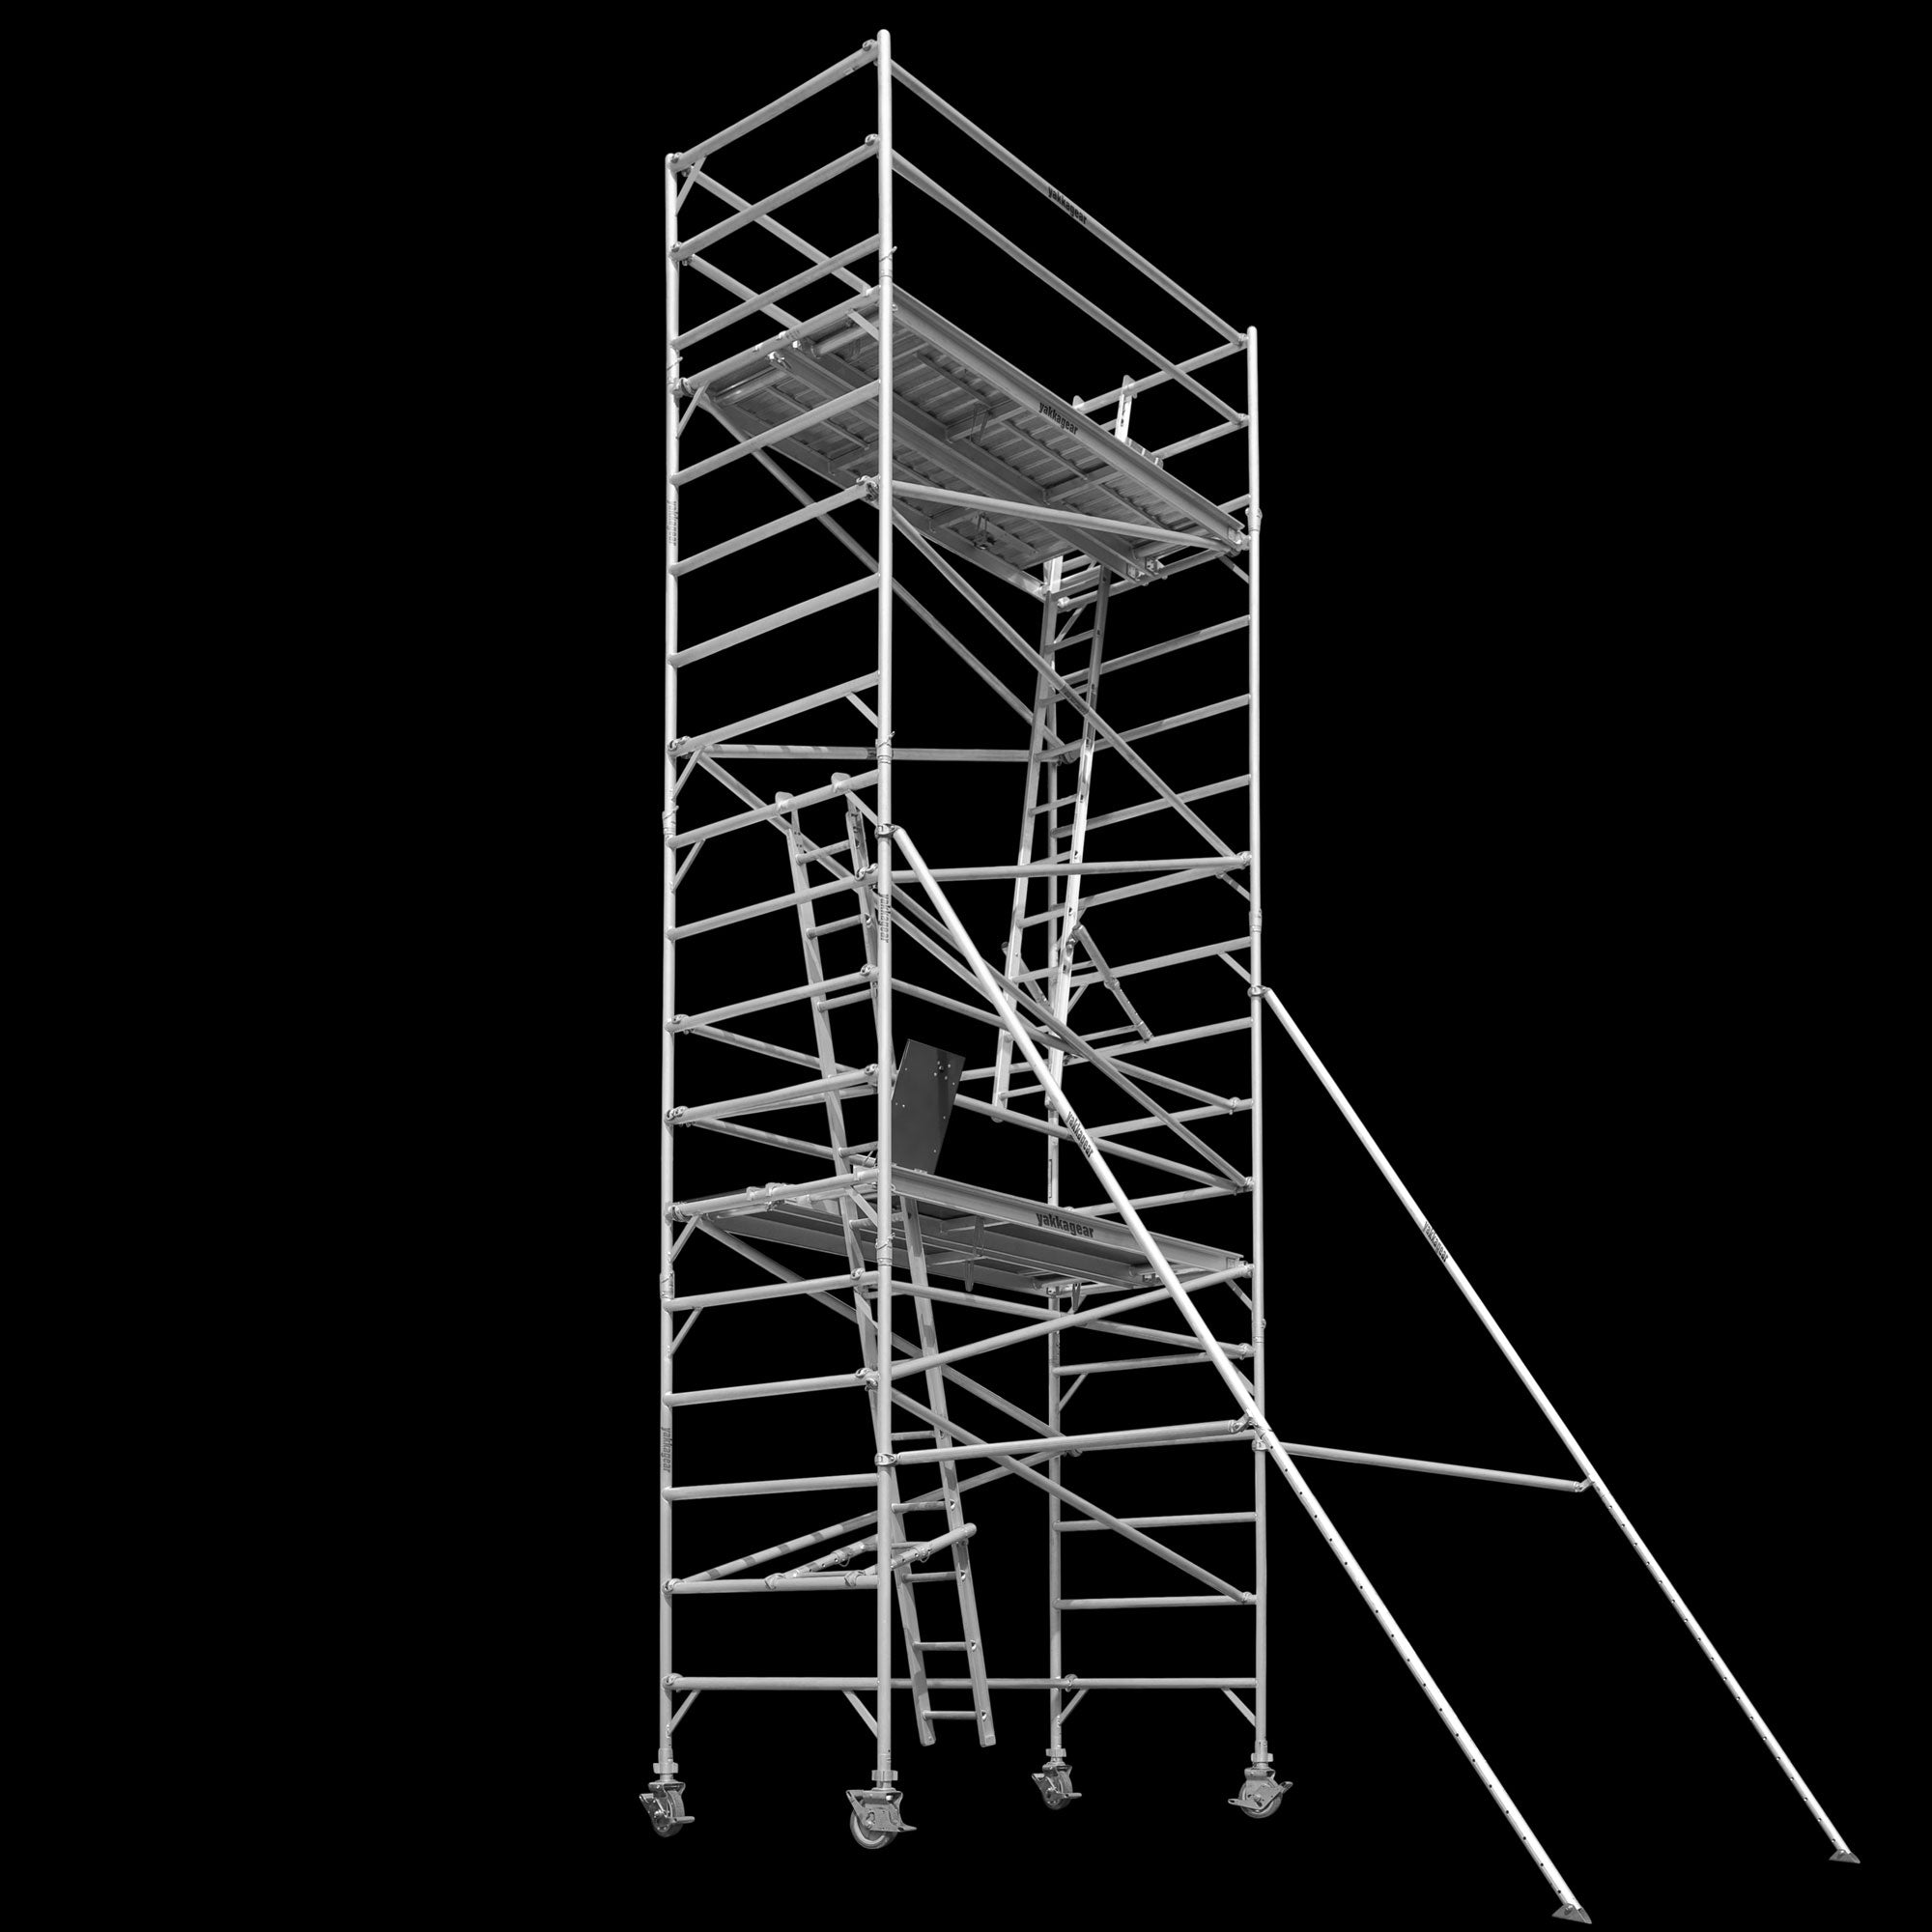 Yakka Gear Australia 2.5m Length 1.3m Wide 8.6m reach wide scaffolding tower access equipment with working height of 6.6m, view from the front side angle. 